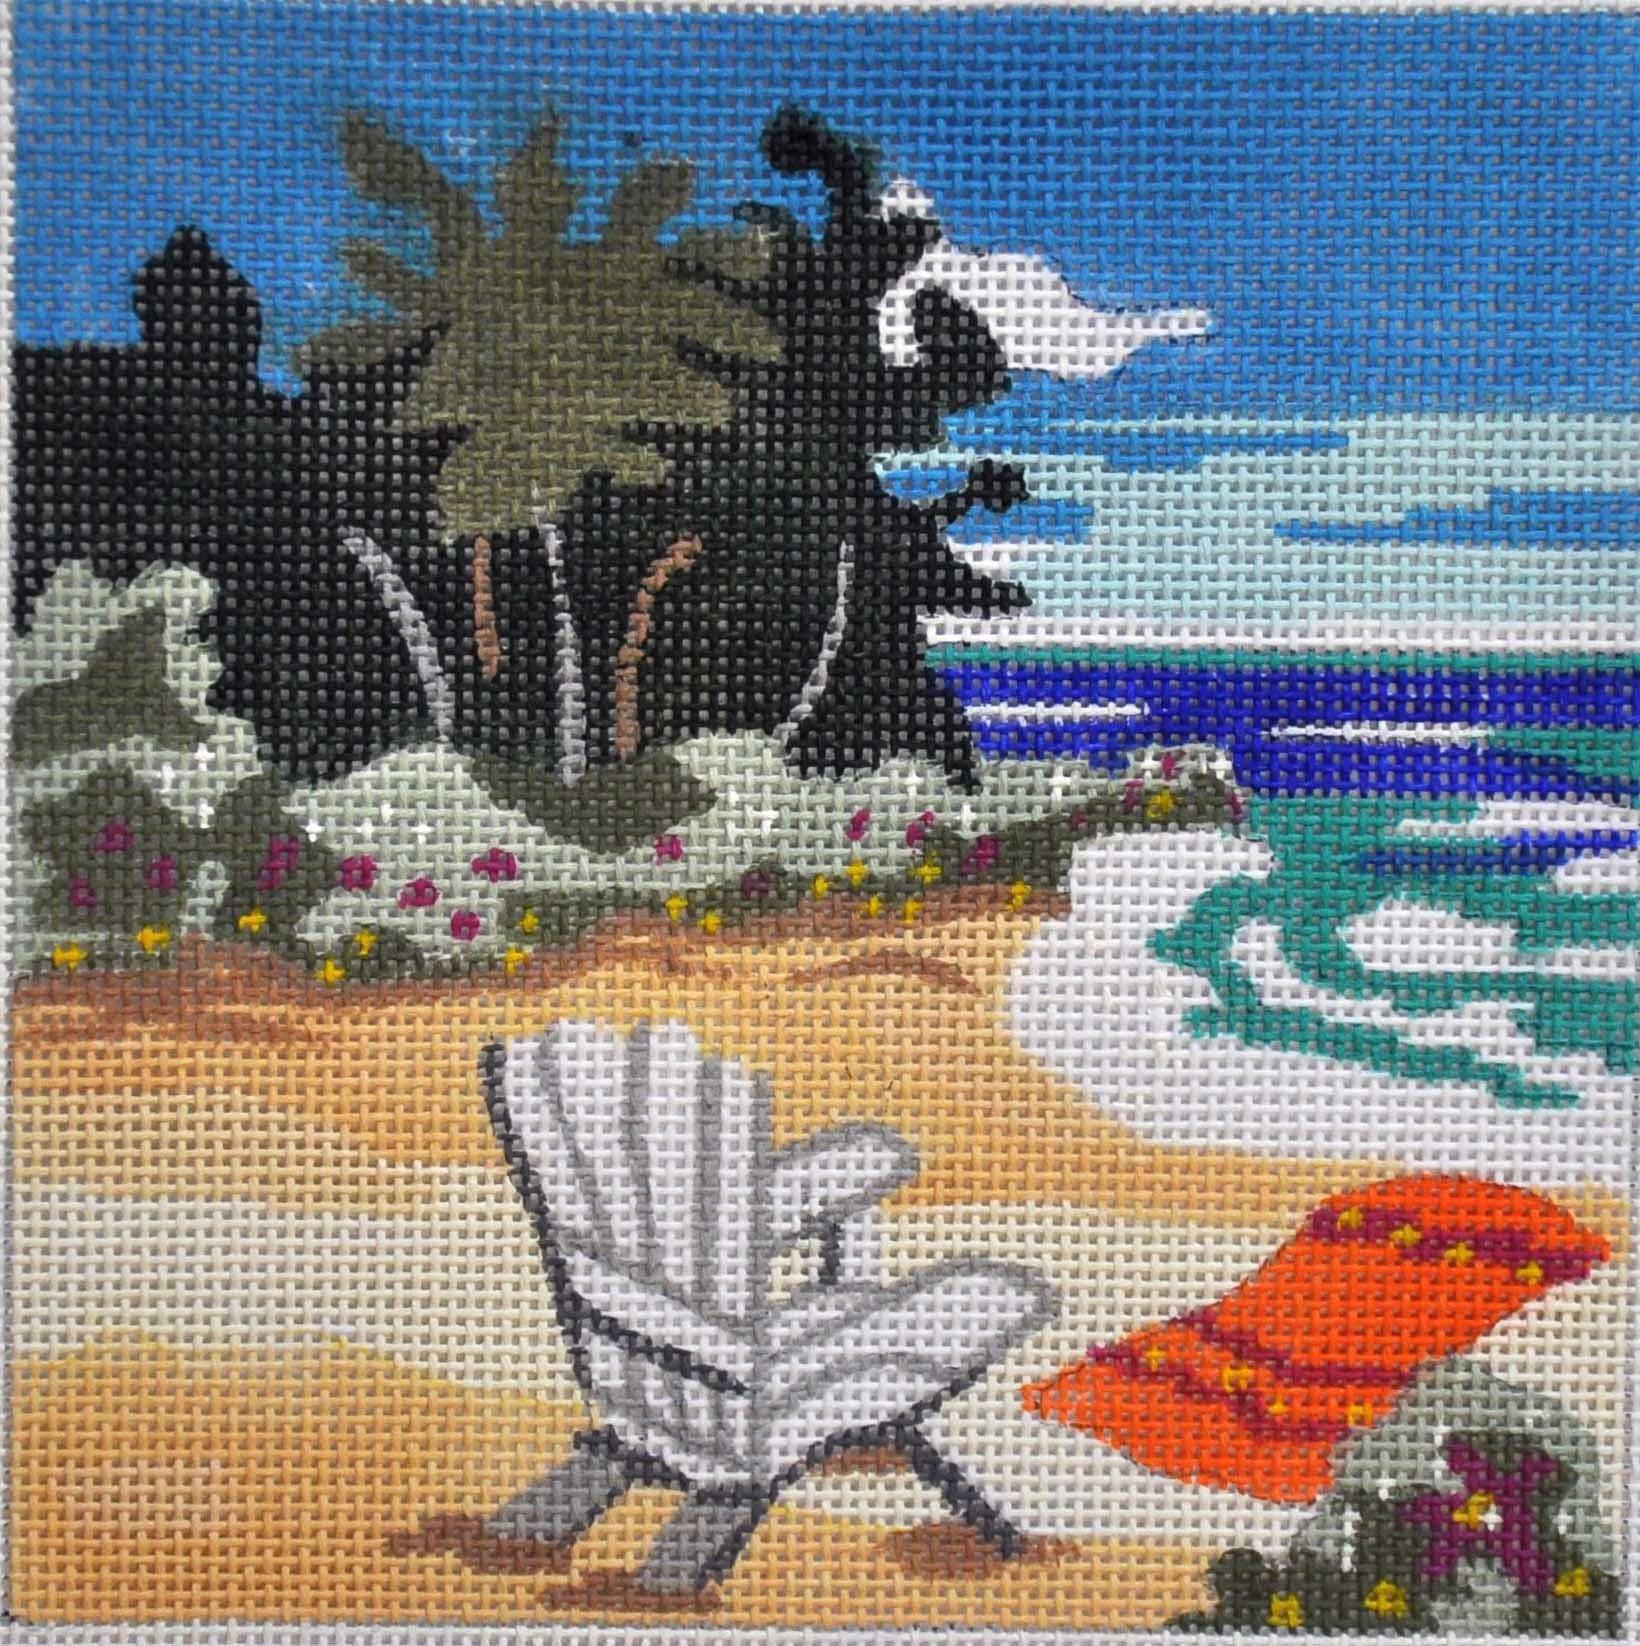 How to Paint a Canvas for Needlepoint Projects